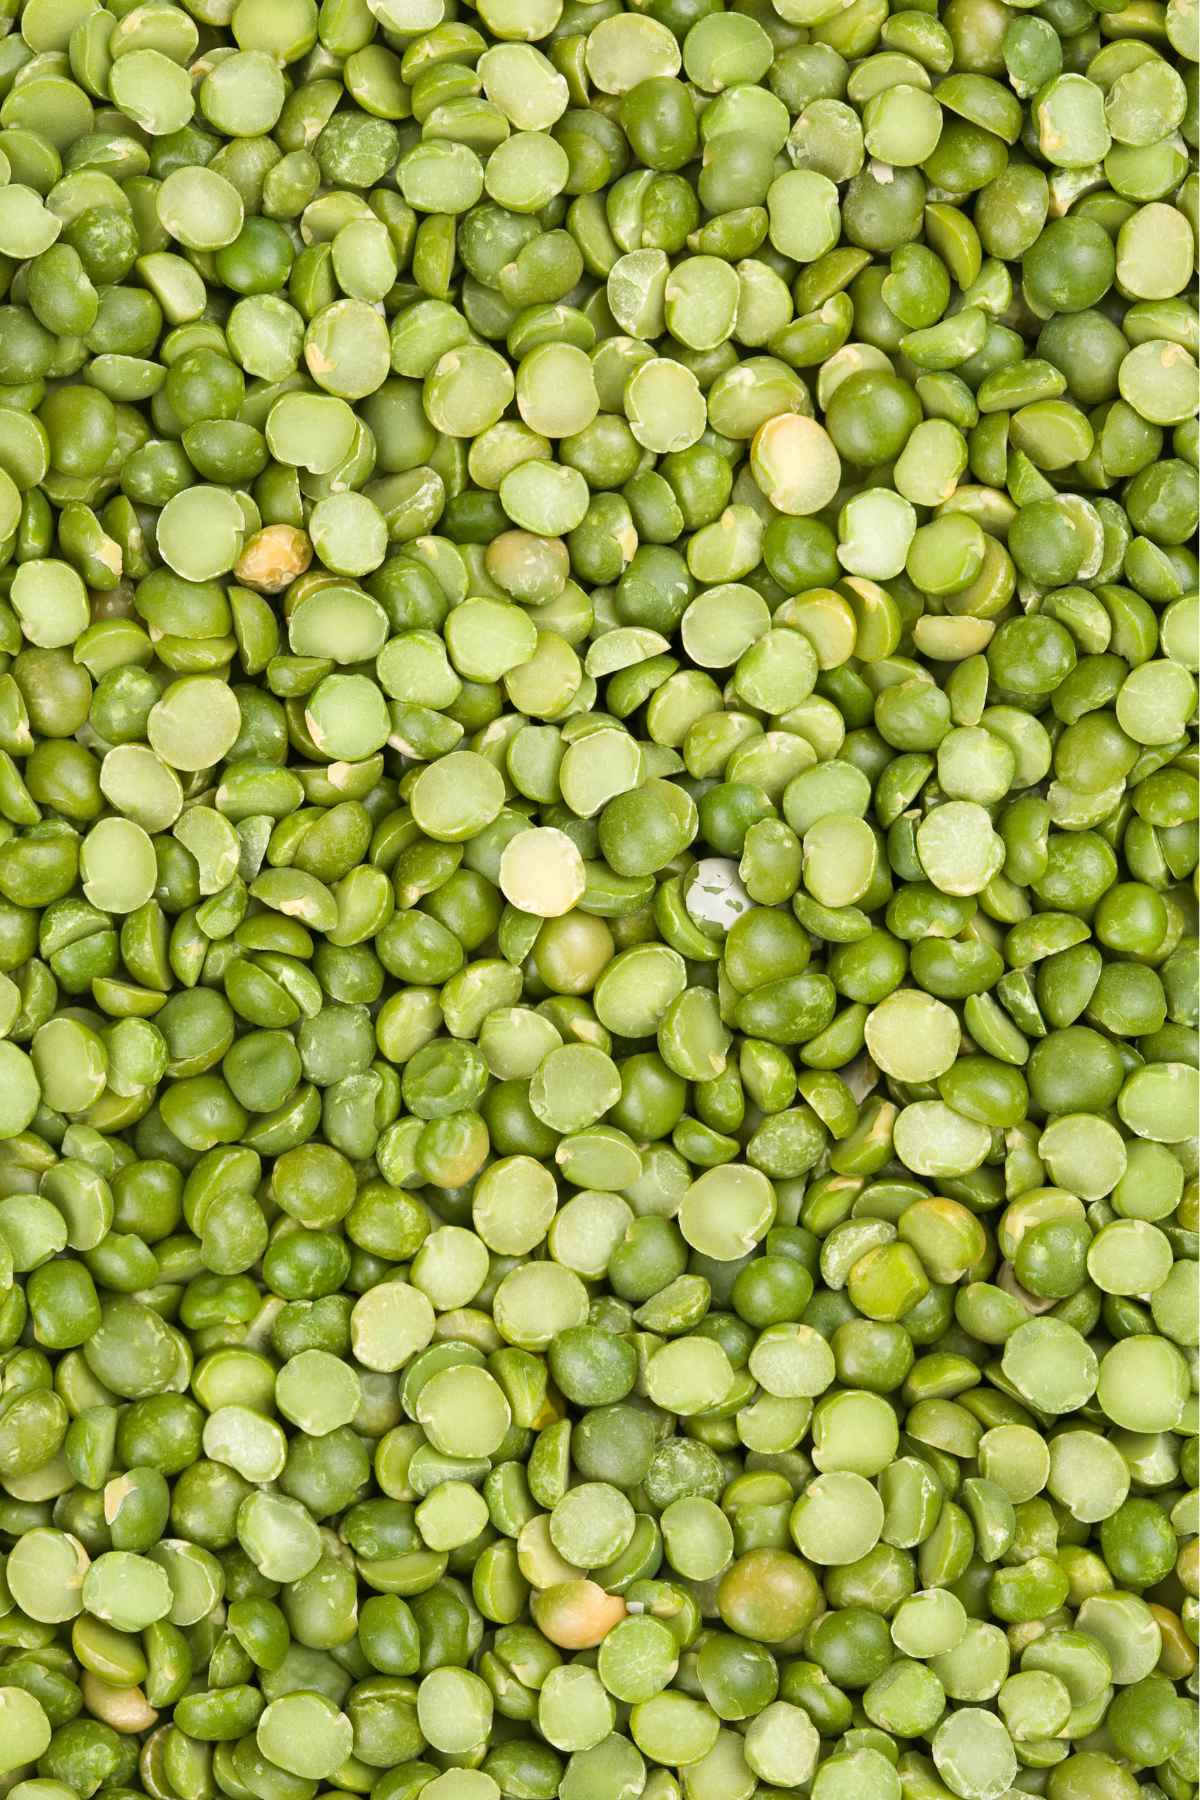 high protein beans and legumes